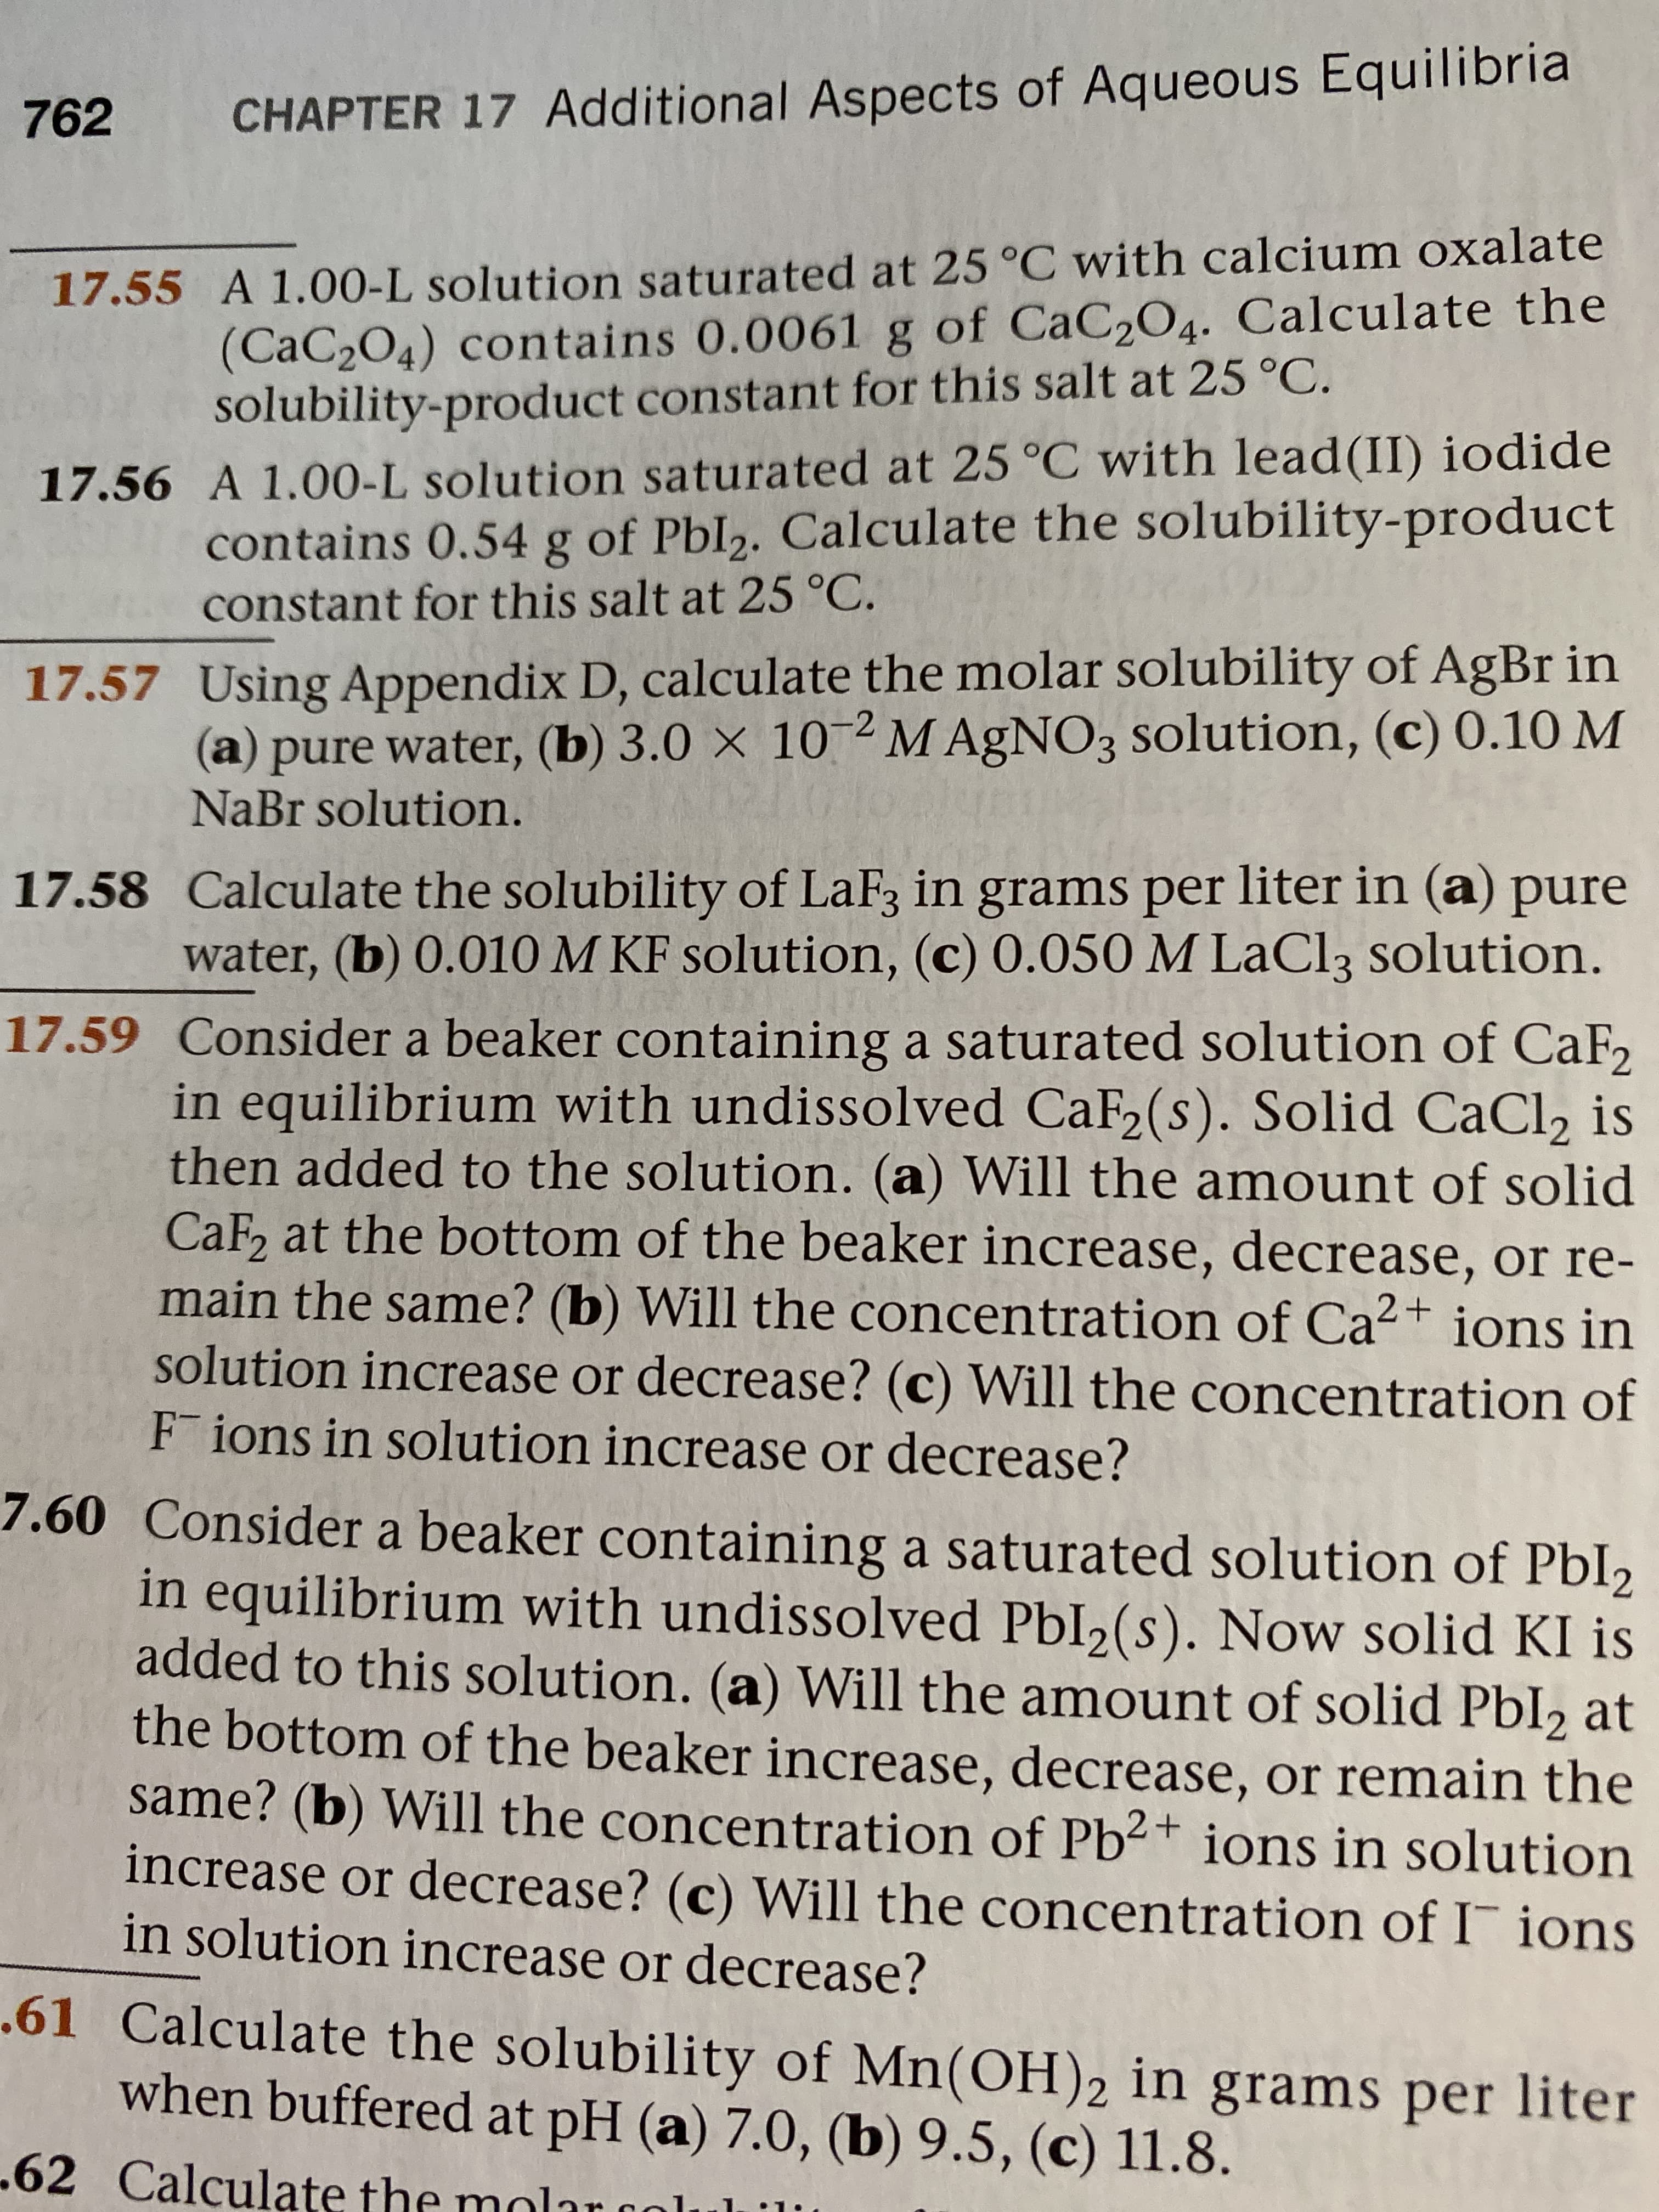 762
CHAPTER 17 Additional Aspects of Aqueous Equilibria
17.55 A 1.00-L solution saturated at 25 °C with calcium oxalate
(CaC2O4) contains 0.0061 g of CaC2O4. Calculate the
solubility-product constant for this salt at 25 °C.
17.56 A 1.00-L solution saturated at 25 °C with lead(II) iodide
contains 0.54 g of Pbl2. Calculate the solubility-product
constant for this salt at 25 °C.
17.57 Using Appendix D, calculate the molar solubility of AgBr in
(a) pure water, (b) 3.0 × 10 2 M AgNO3 solution, (c) 0.10 M
NaBr solution.
17.58 Calculate the solubility of LaF3 in grams per liter in (a) pure
water, (b) 0.010 M KF solution, (c) 0.050 M LaCl3 solution.
17.59 Consider a beaker containing a saturated solution of CaF,
in equilibrium with undissolved CaF2(s). Solid CaCl, is
then added to the solution. (a) Will the amount of solid
CaF, at the bottom of the beaker increase, decrease, or re-
main the same? (b) Will the concentration of Ca²+ ions in
solution increase or decrease? (c) Will the concentration of
F ions in solution increase or decrease?
7.60 Consider a beaker containing a saturated solution of PbI2
in equilibrium with undissolved PbI2(s). Now solid KI is
added to this solution. (a) Will the amount of solid Pbl2 at
the bottom of the beaker increase, decrease, or remain the
same? (b) Will the concentration of Pb2+ ions in solution
increase or decrease? (c) Will the concentration of I ions
in solution increase or decrease?
.61 Calculate the solubility of Mn(OH)2 in grams per liter
when buffered at pH (a) 7.0, (b) 9.5, (c) 11.8.
-62 Calculate the molar golul 'i
